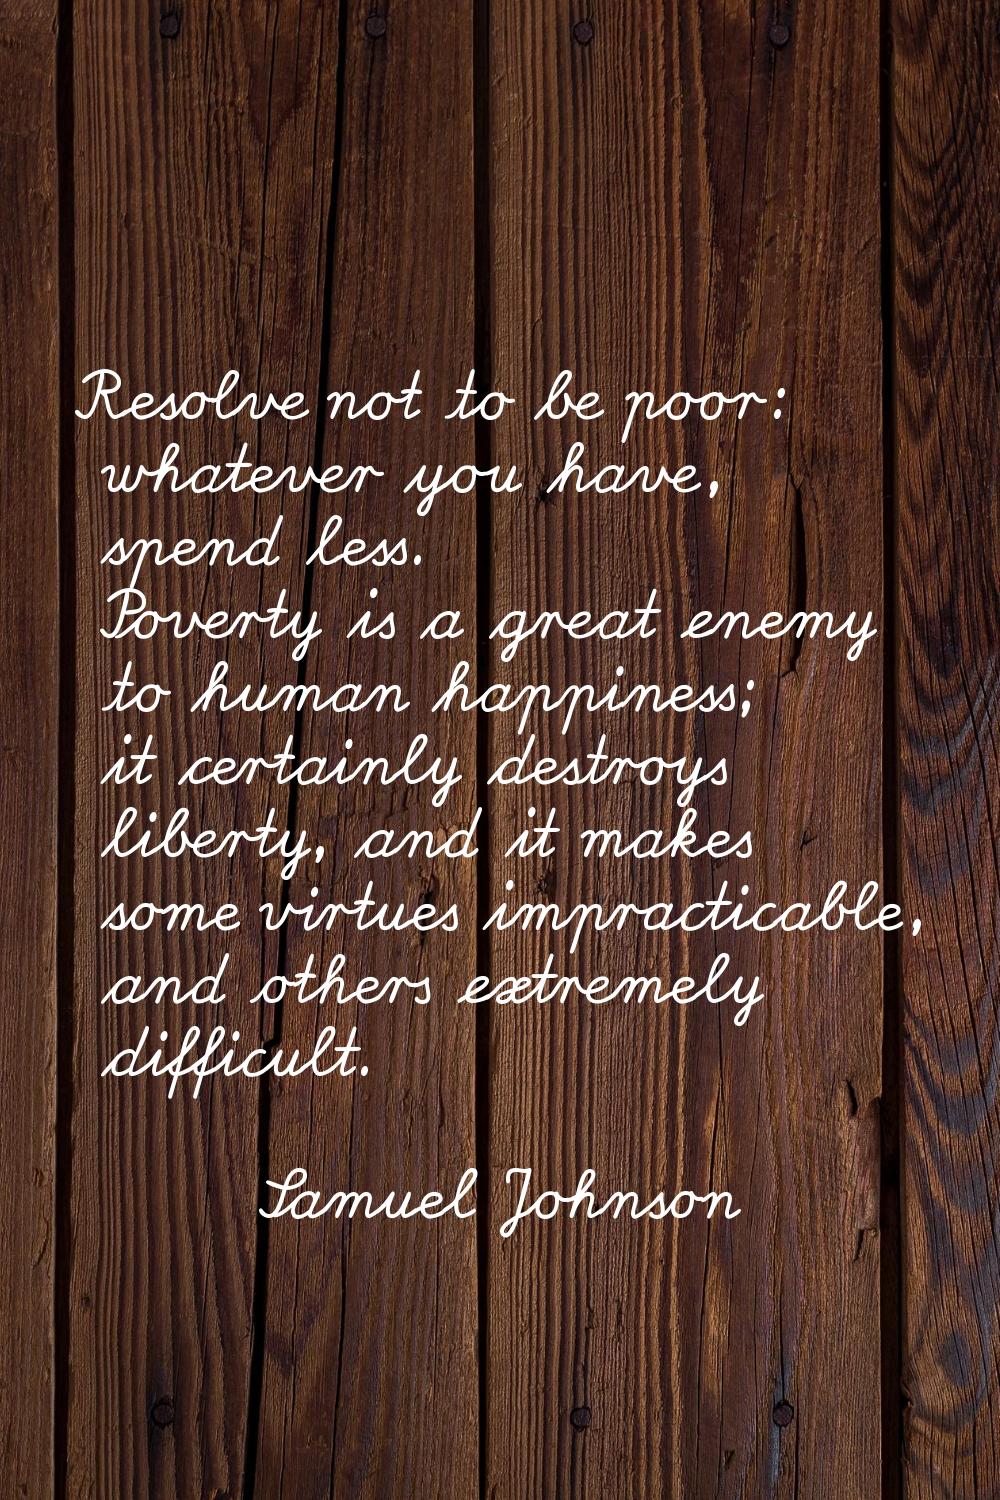 Resolve not to be poor: whatever you have, spend less. Poverty is a great enemy to human happiness;